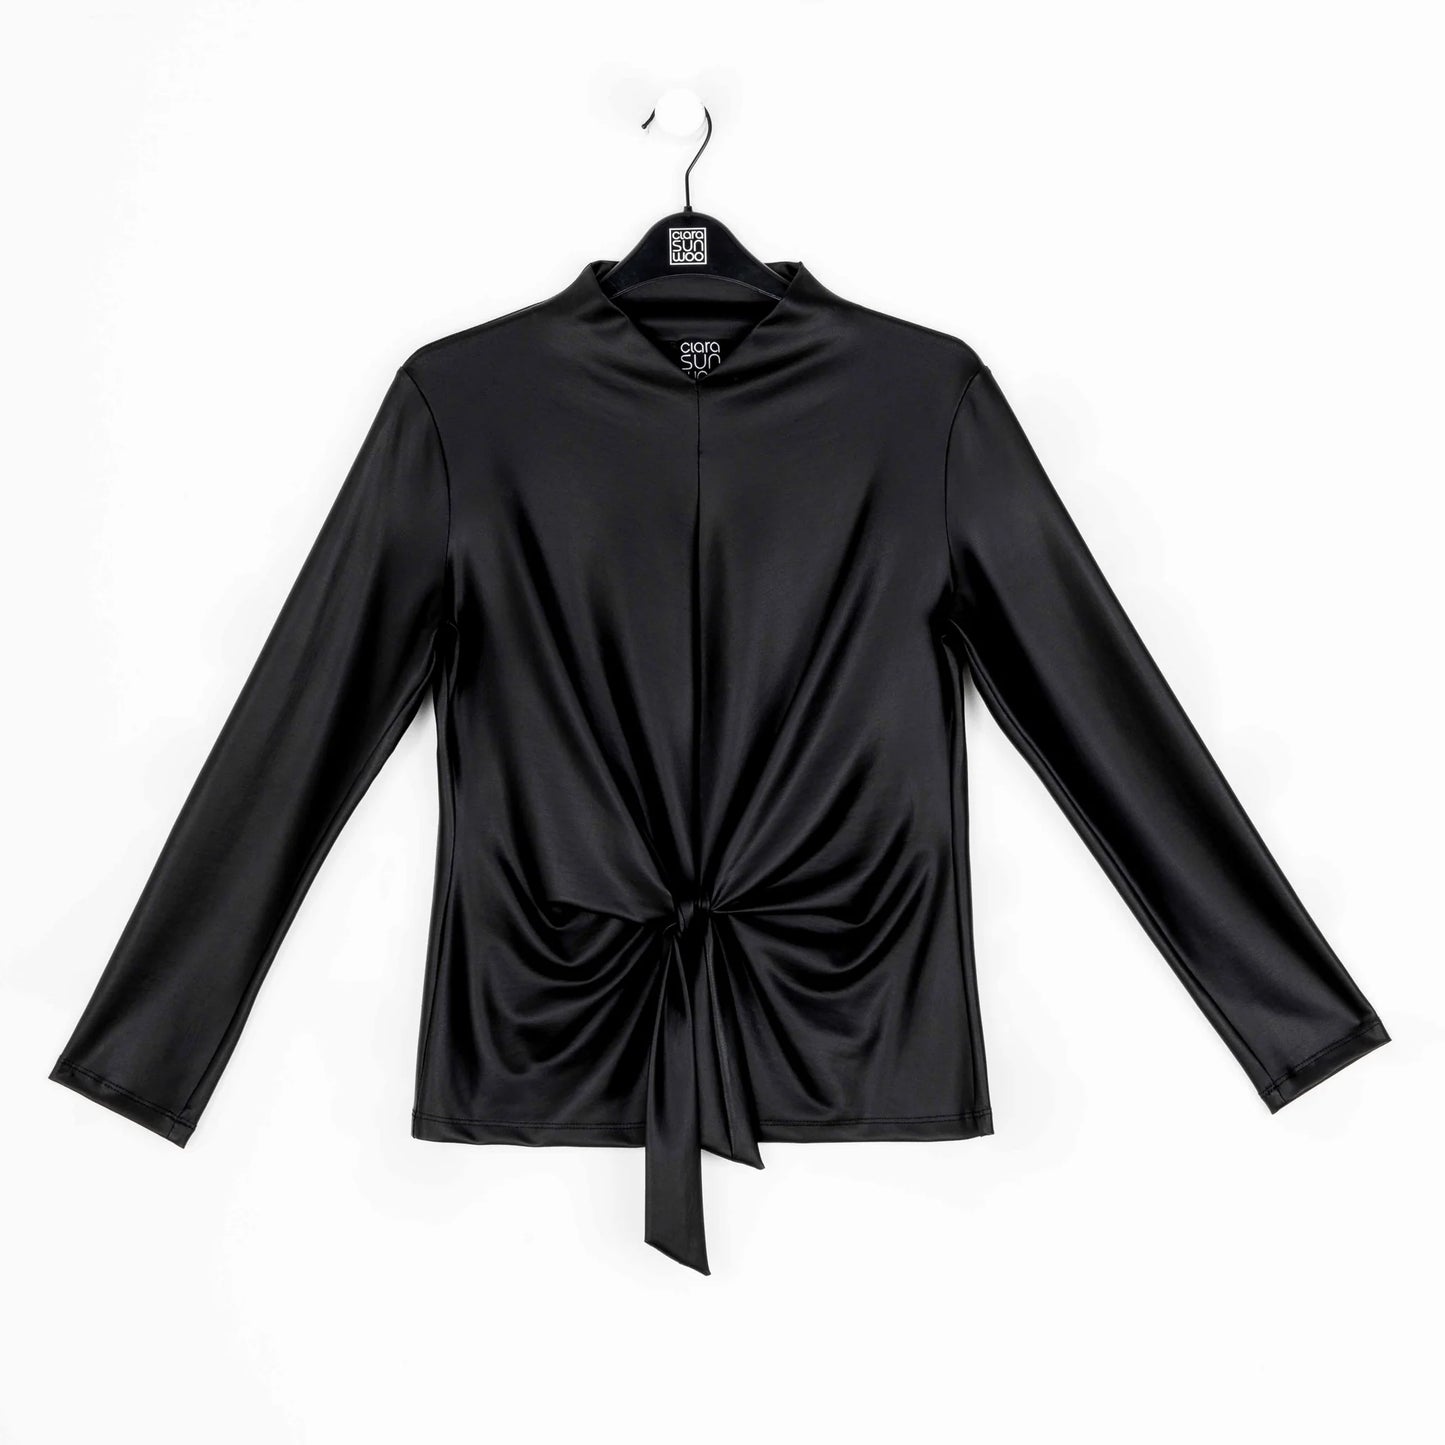 Clara Sunwoo Clara Sunwoo - Liquid Leather Knit Top Center Tie Detail Black available at The Good Life Boutique